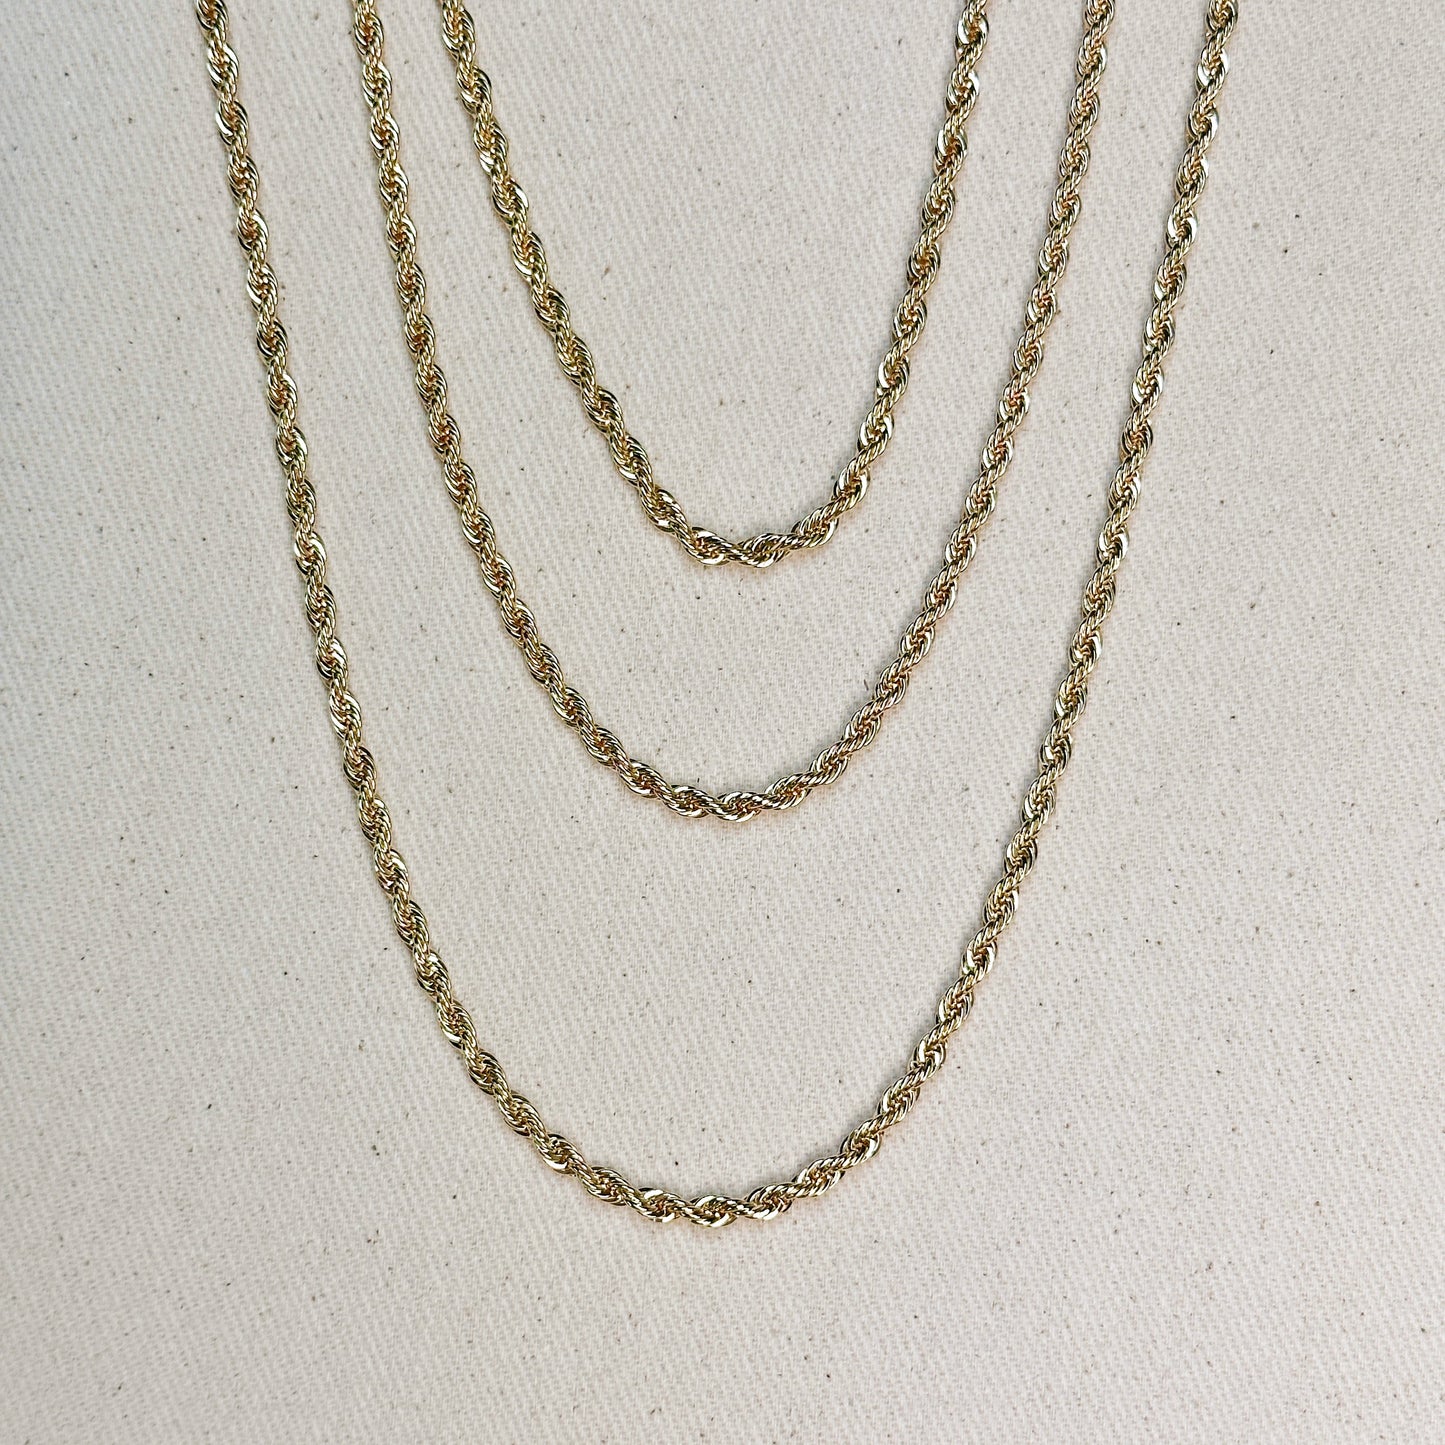 18k Gold Filled Rope Chain In 3.0mm Thickness Gold Chain